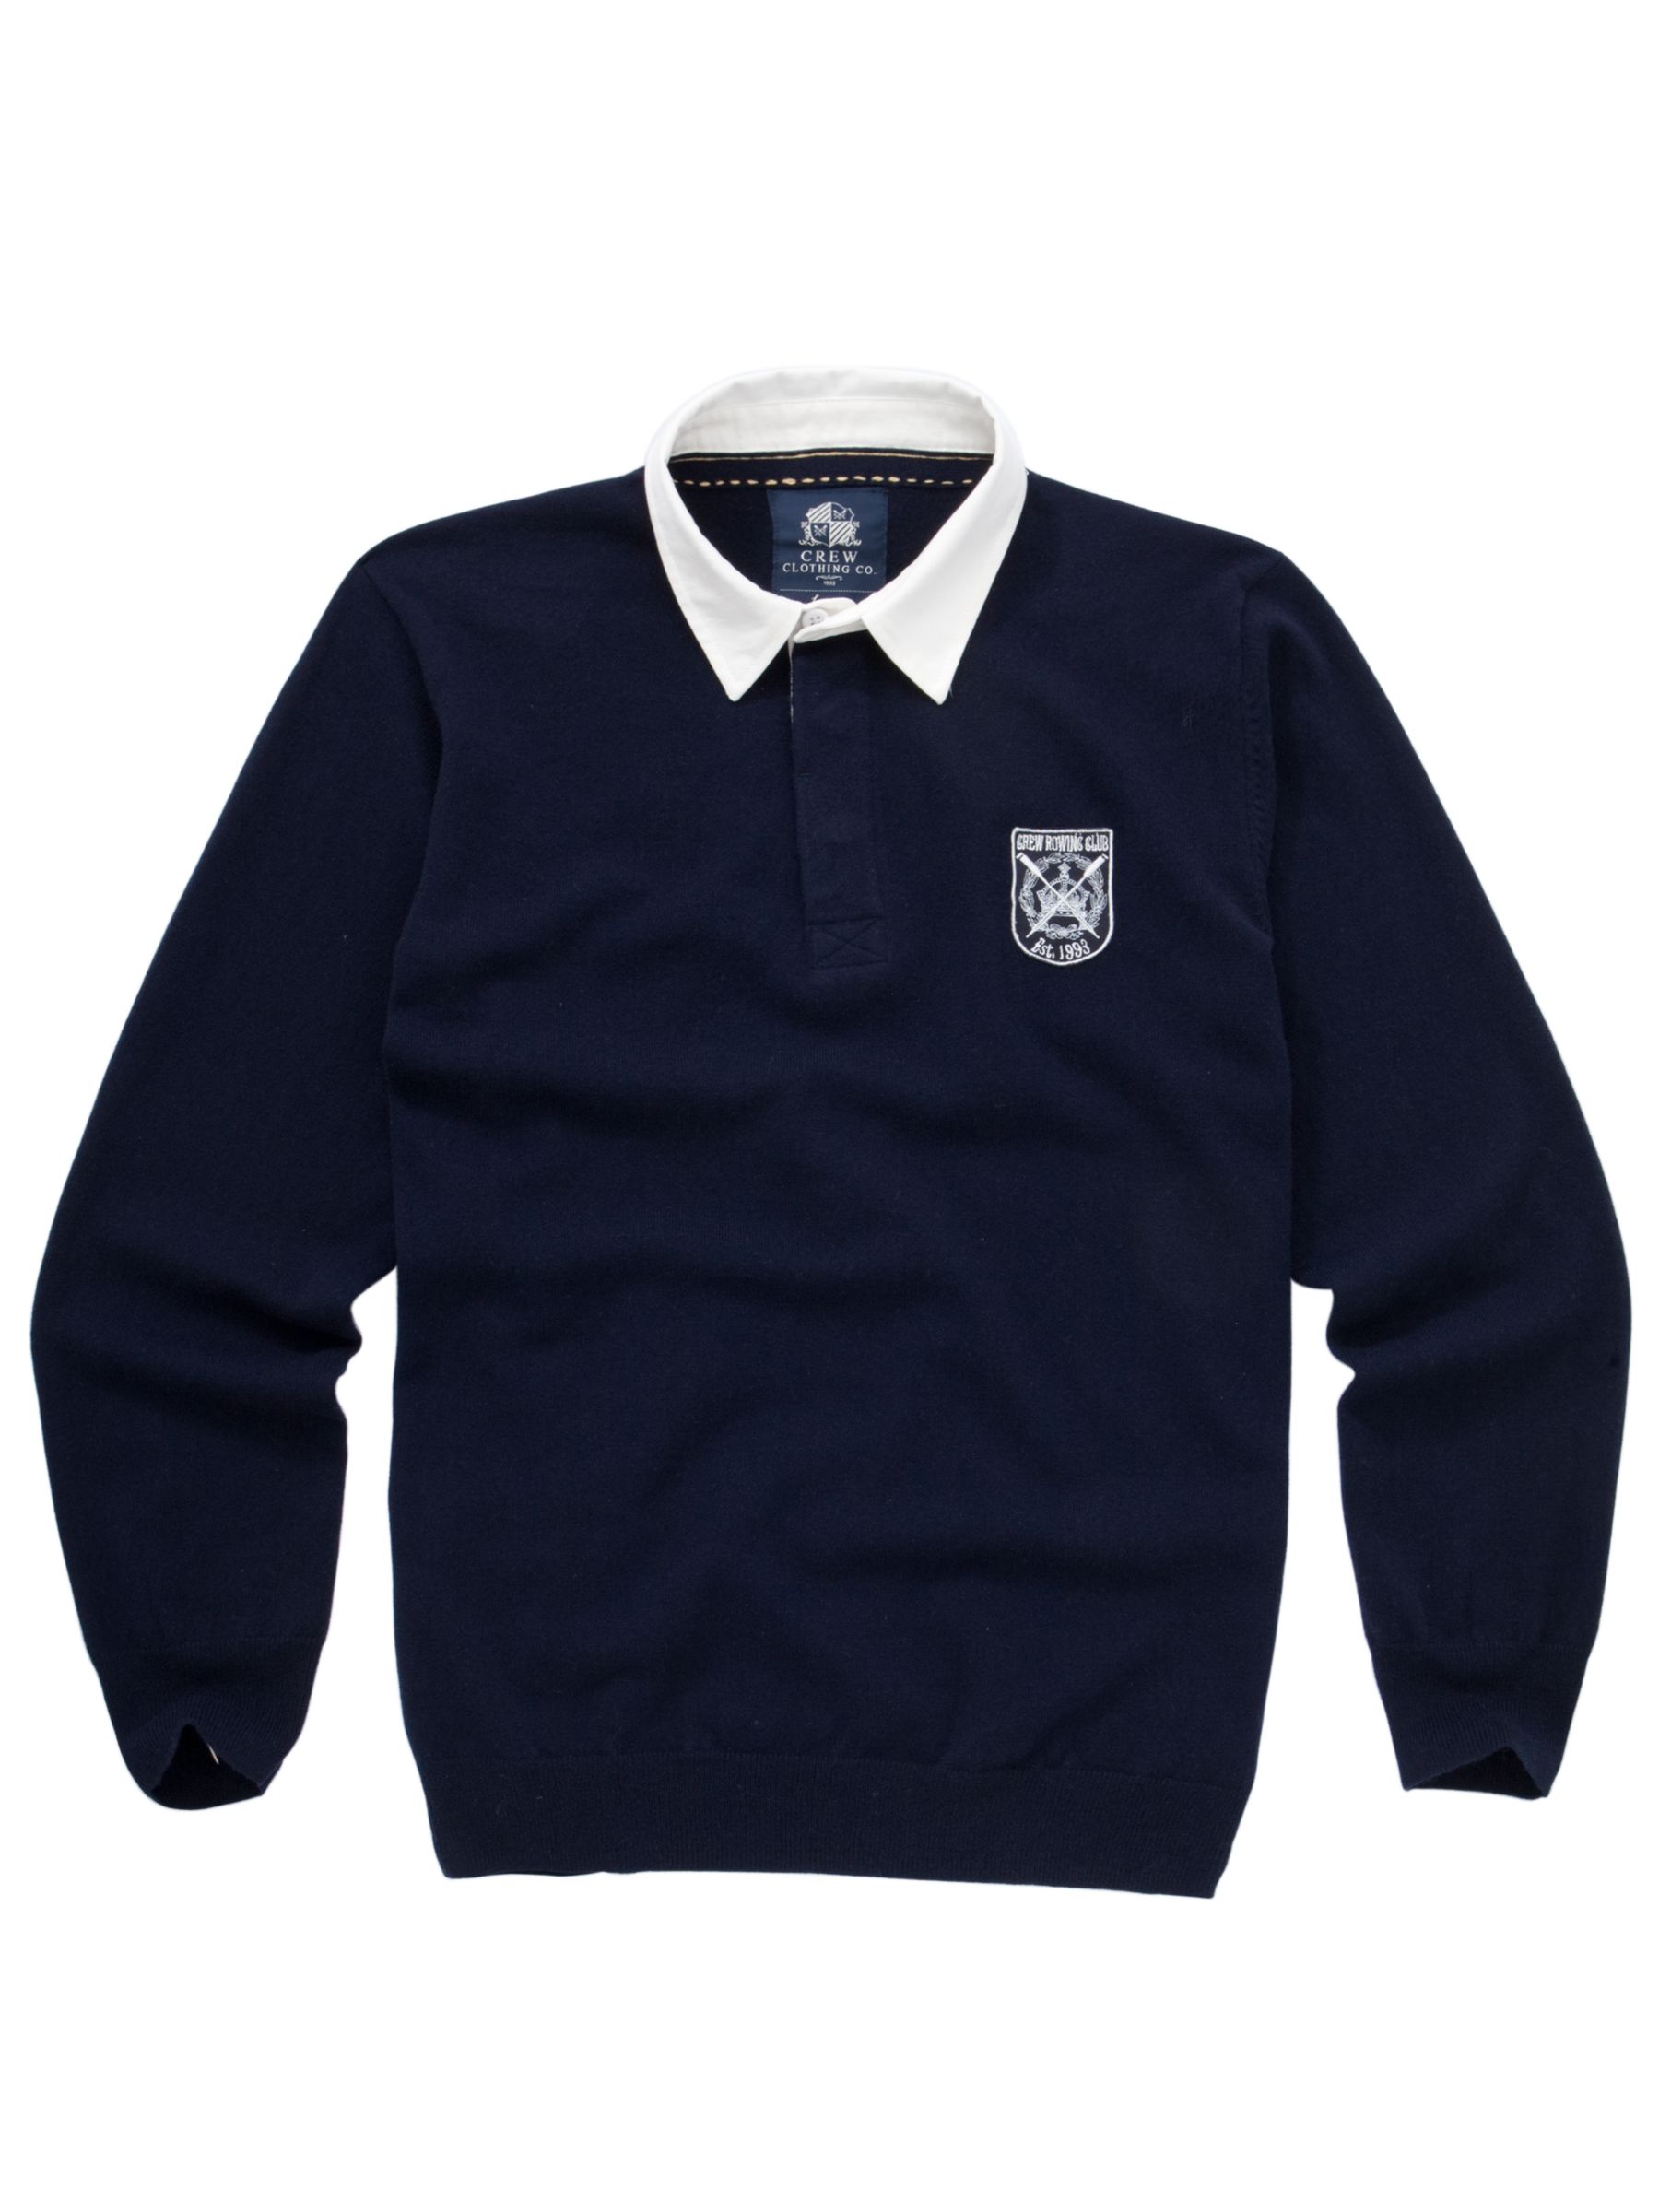 Knit Rugby Shirt, Navy